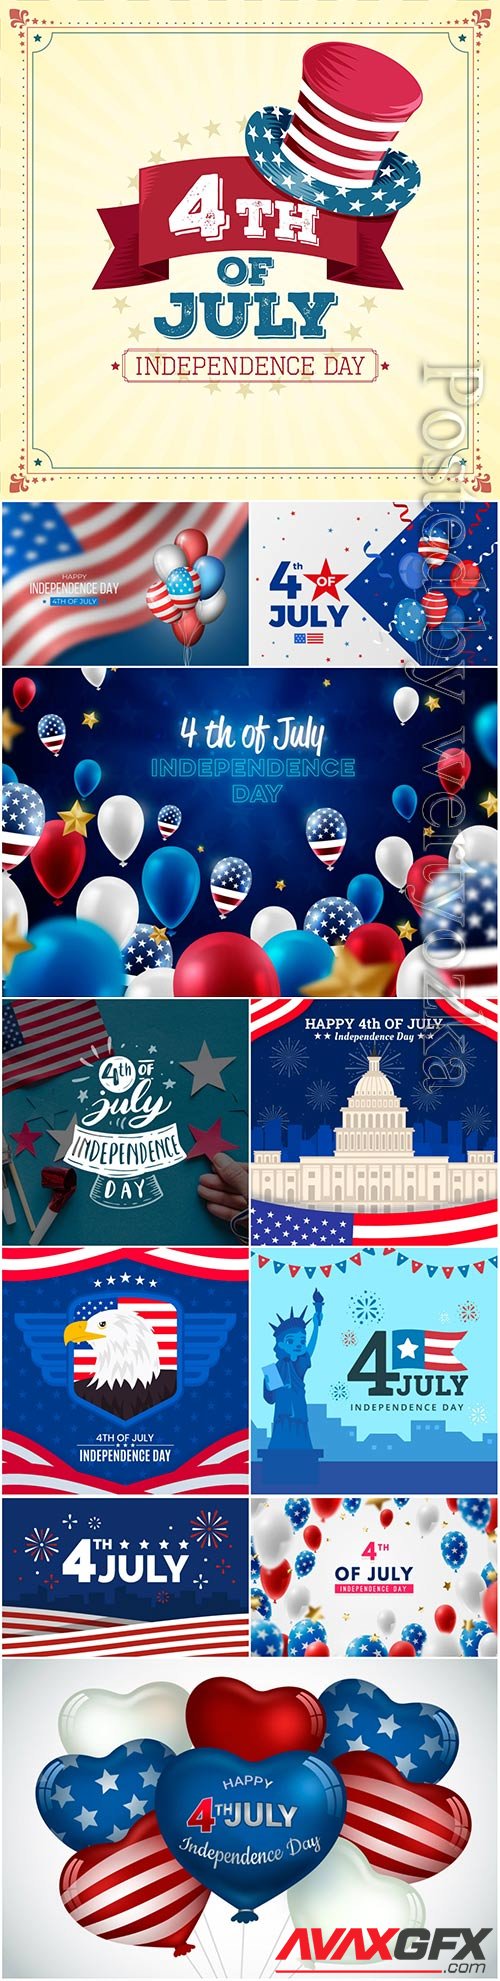 Realistic usa independence day background vector set